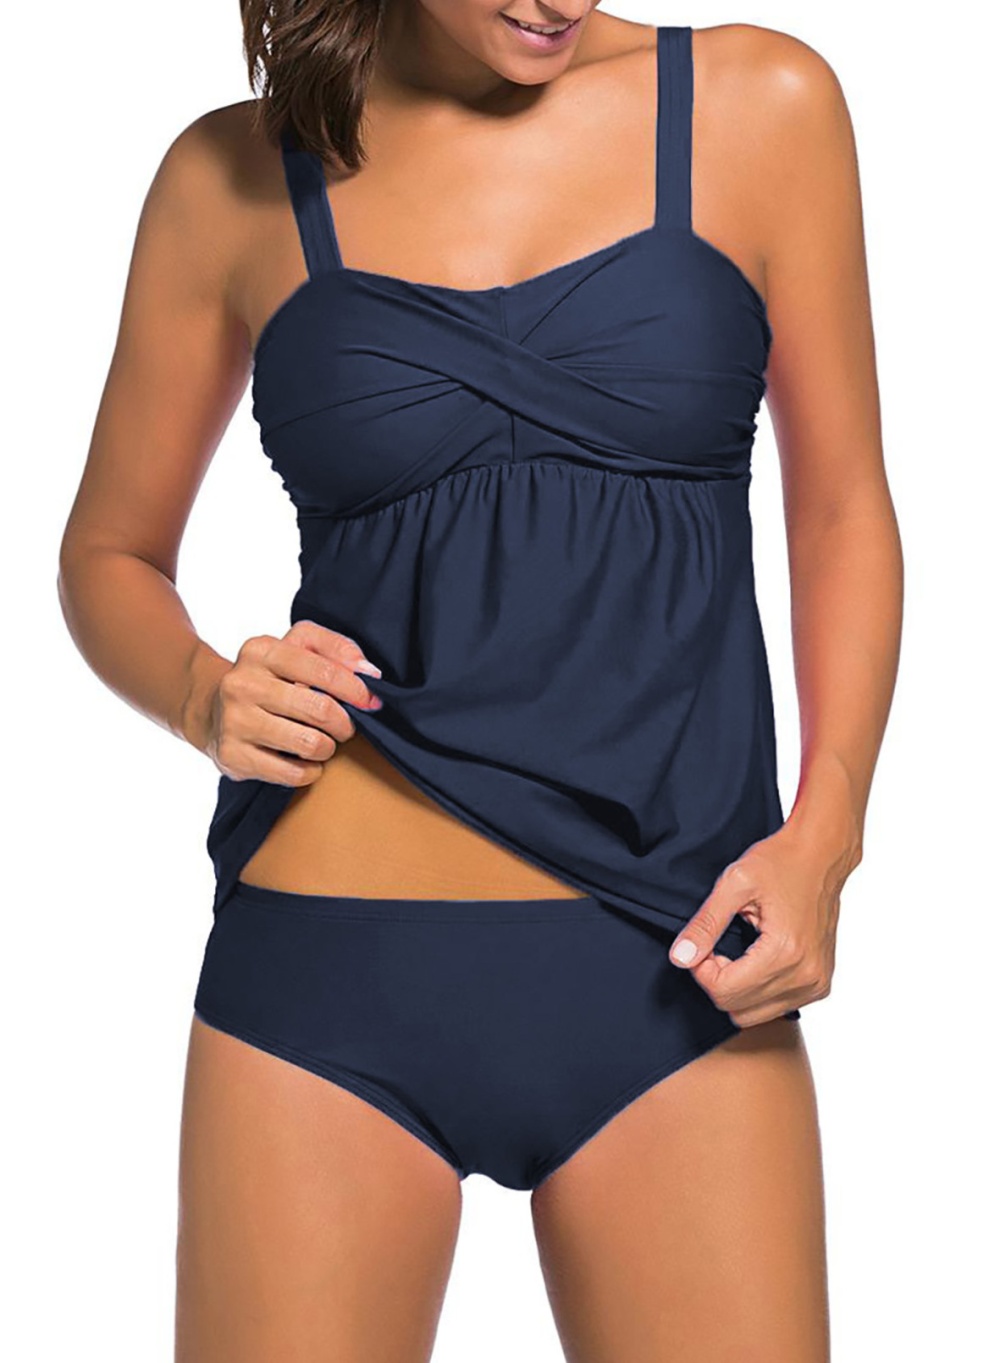 Large yard conservatism low-waist separates swimsuit for women